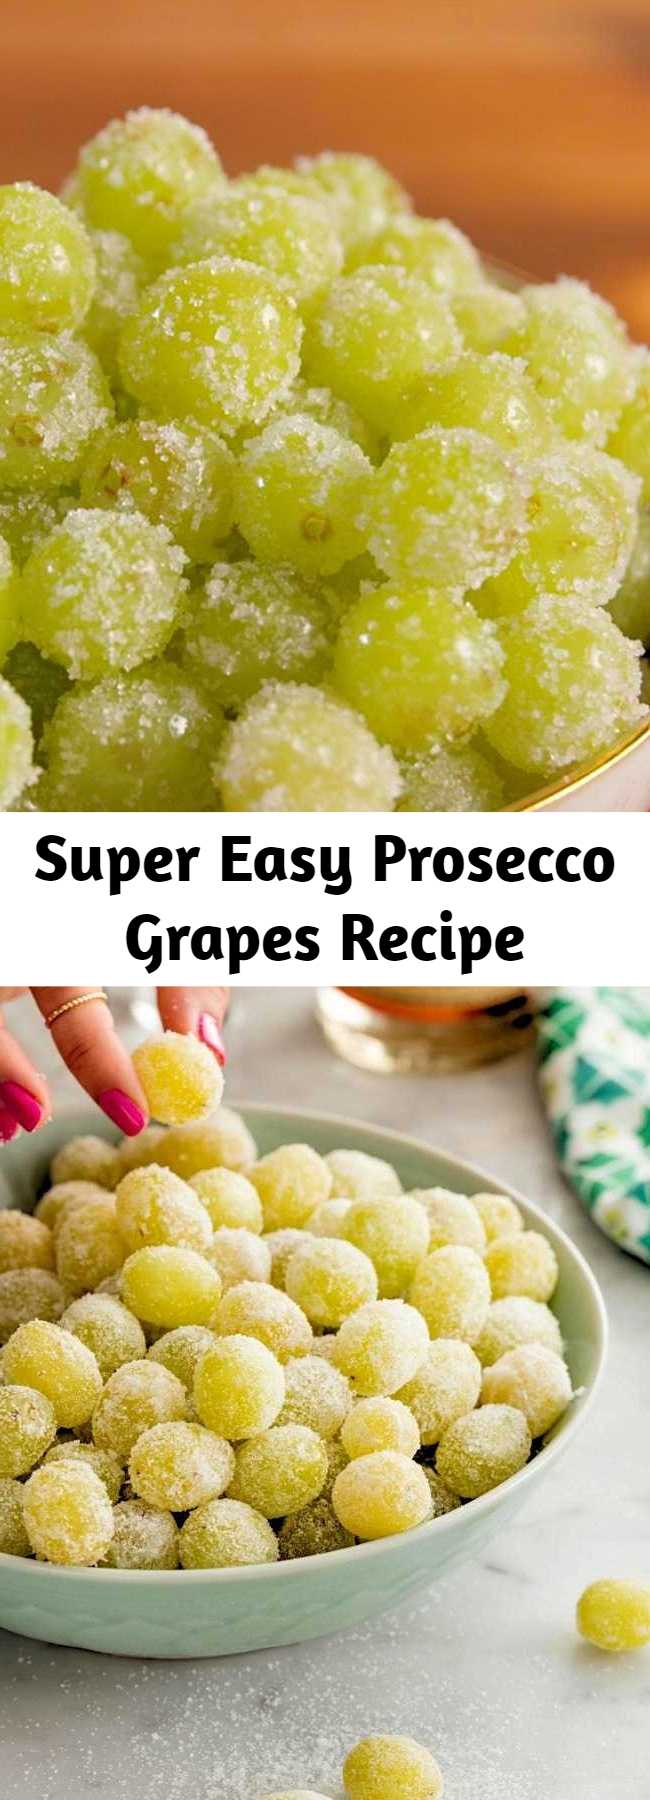 Super Easy Prosecco Grapes Recipe - These Sugared Prosecco Grapes are a super easy dessert recipe! These boozy, fun champagne soaked grapes are perfect for parties, as is or frozen! Give grapes a festive upgrade!